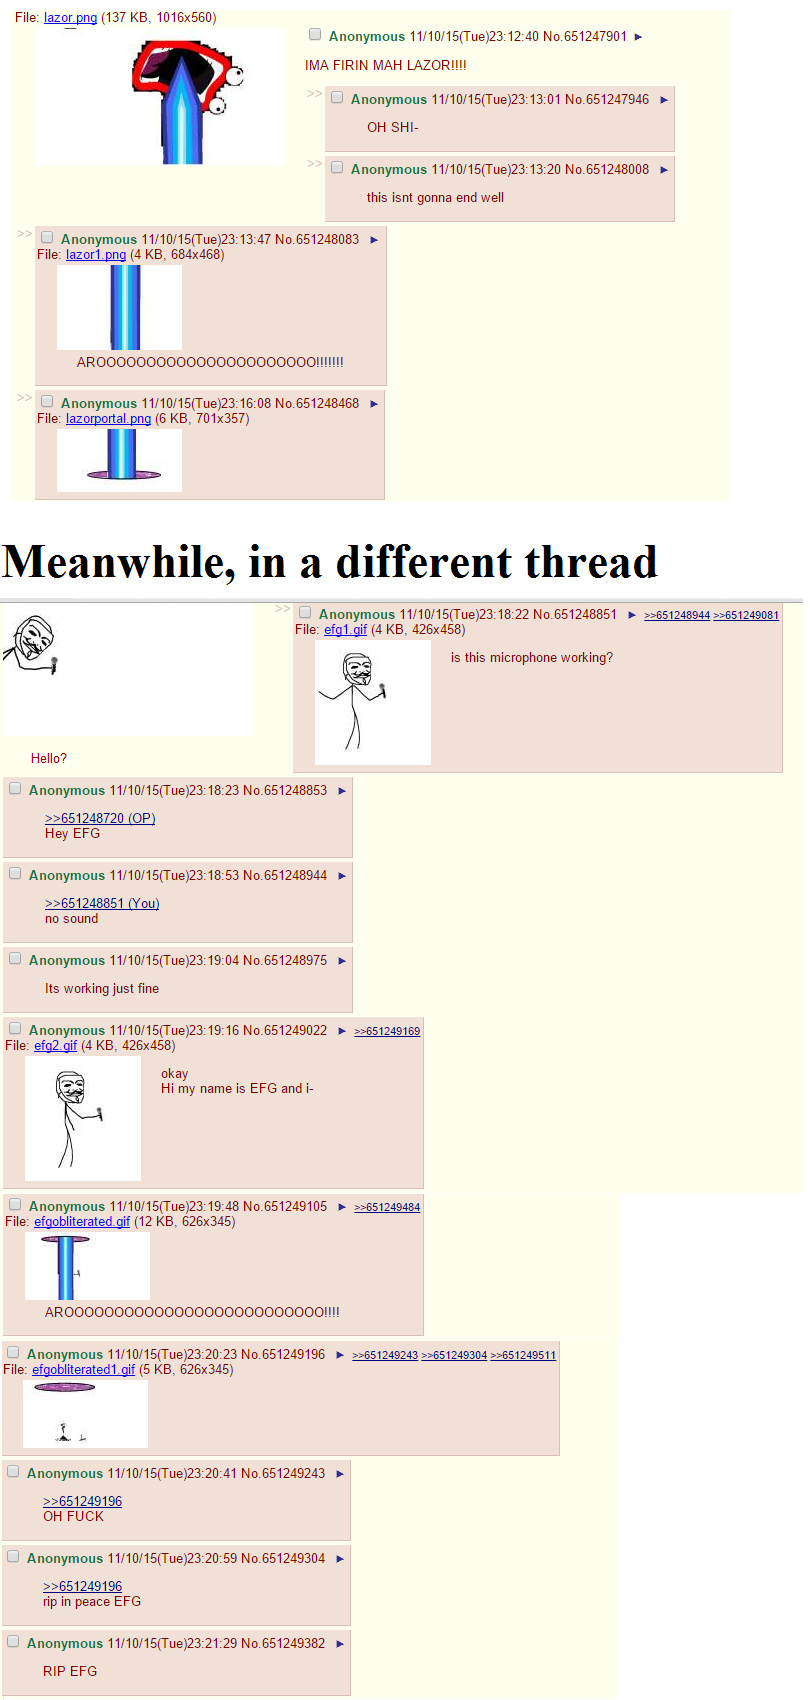 Tge only good thing about 4Chan - meme